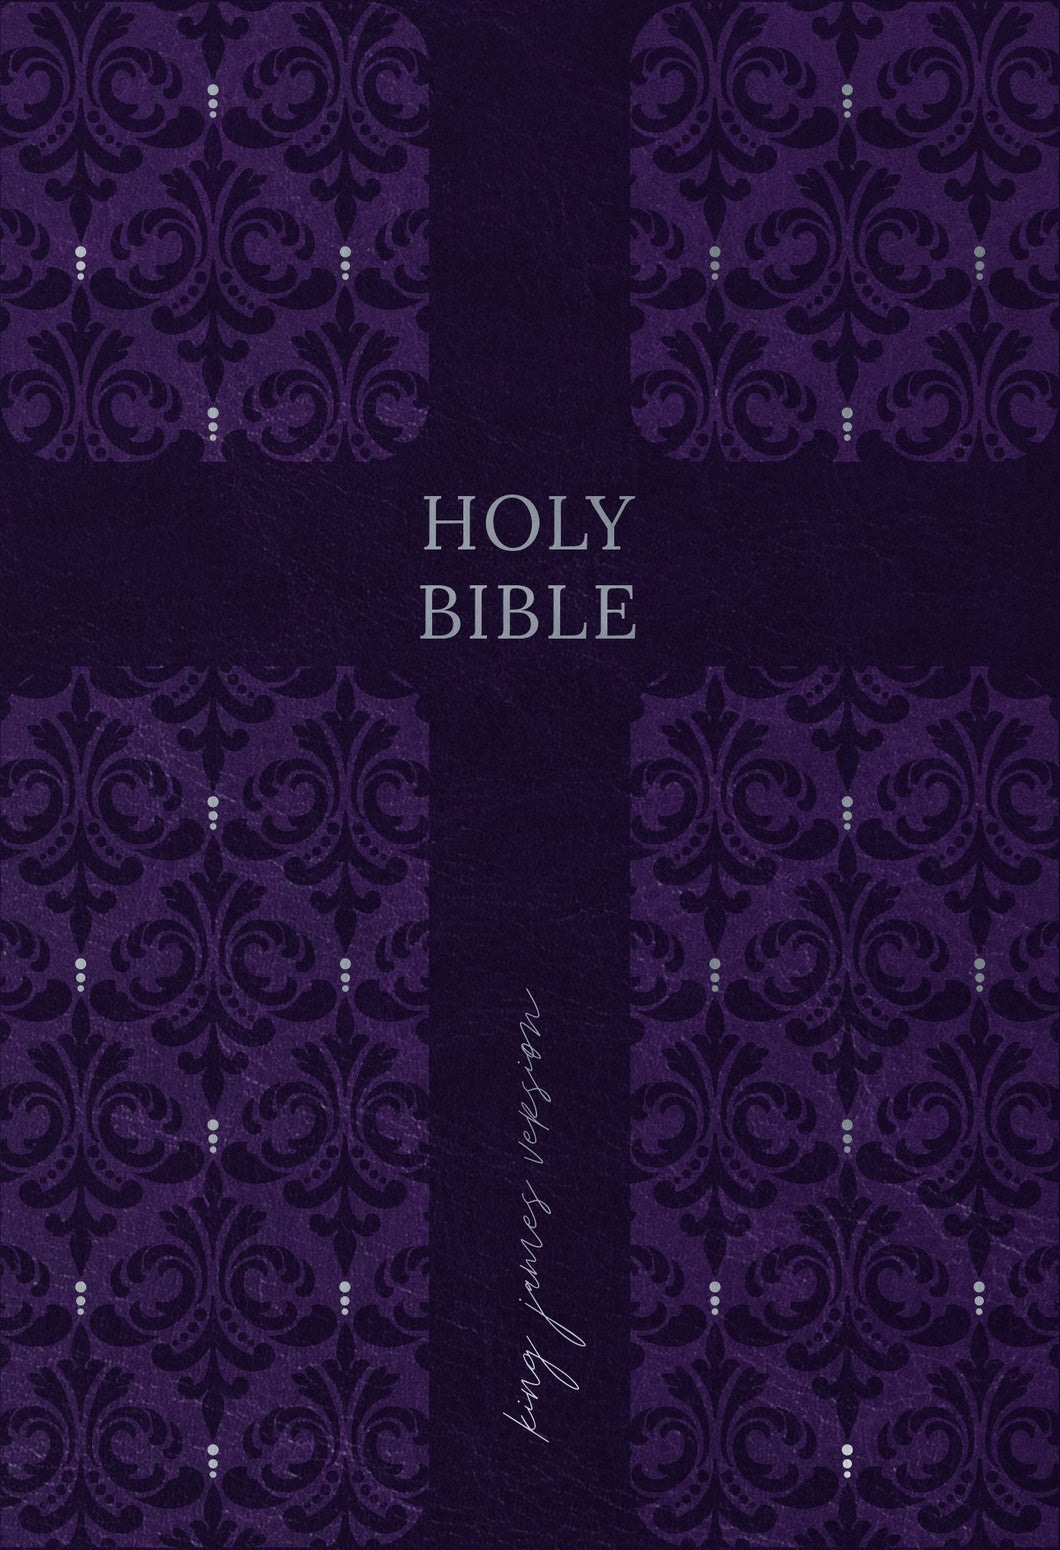 KJV Holy Bible/Compact-Amethyst Faux Leather